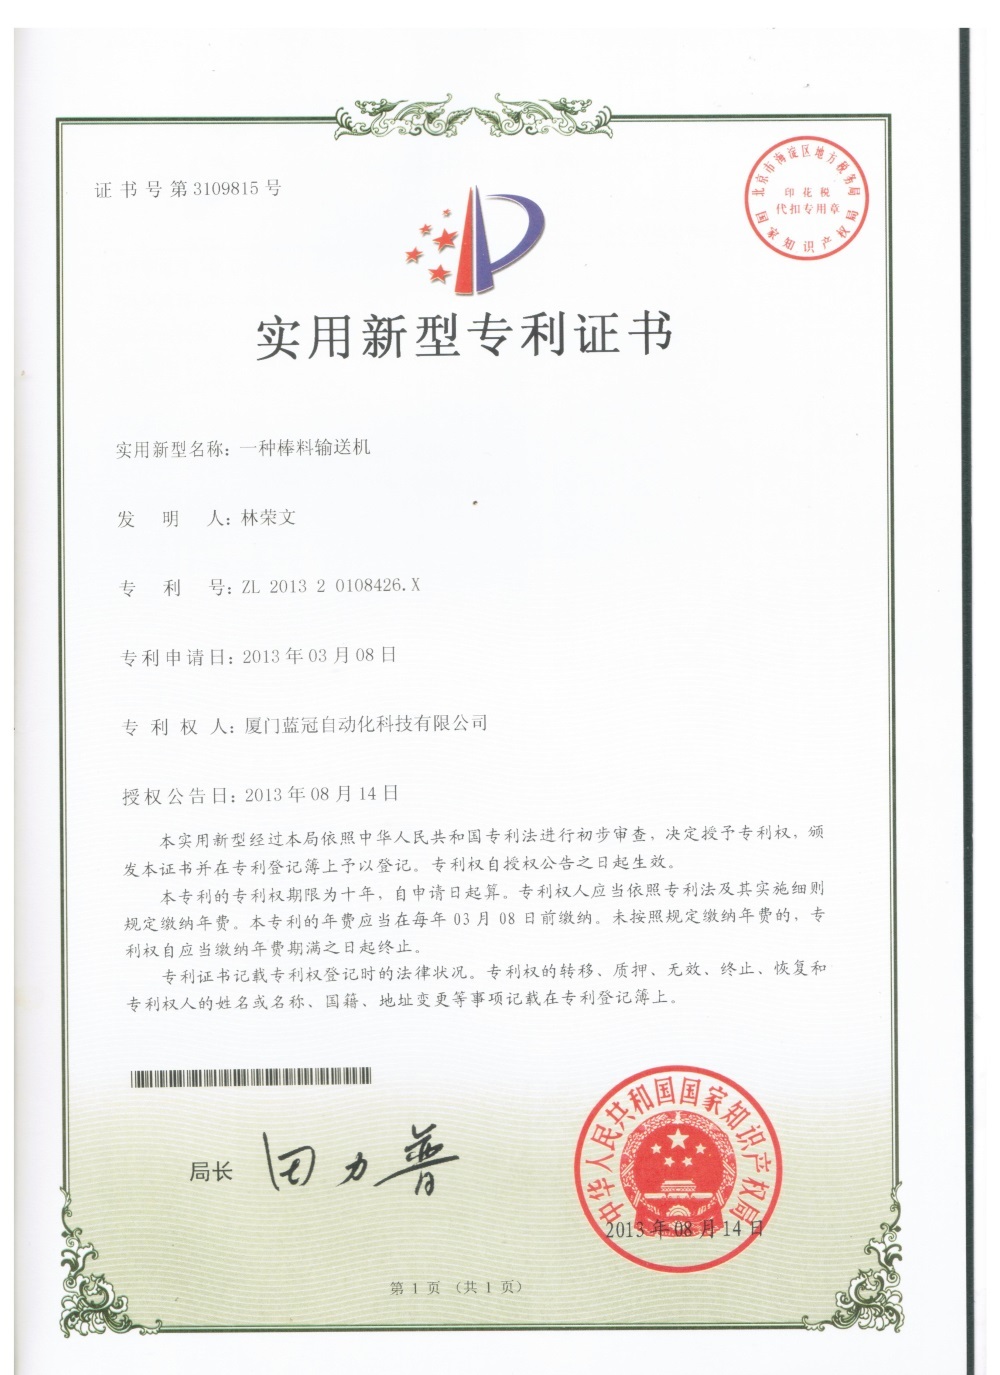 Patent certificate for utility model of bar conveyor